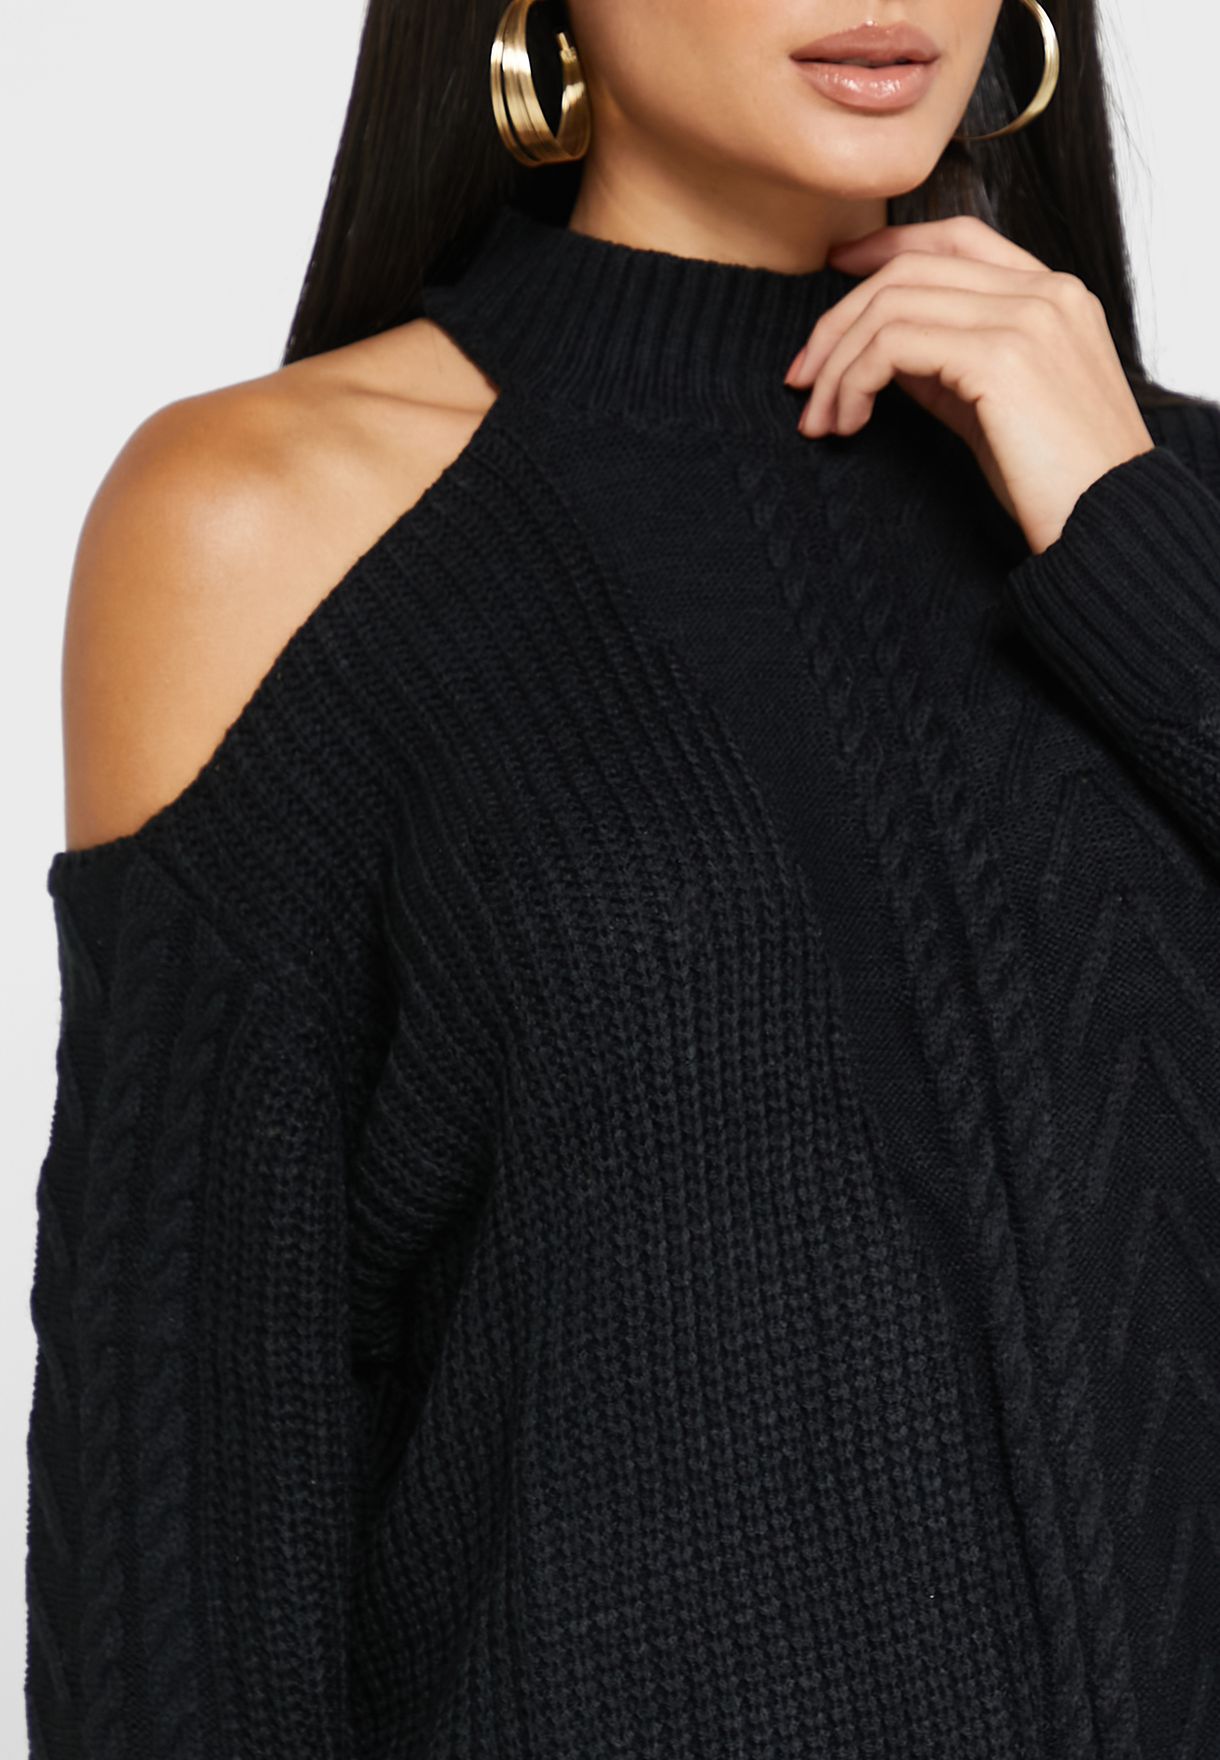 Sweater With One Shoulder Cut Out